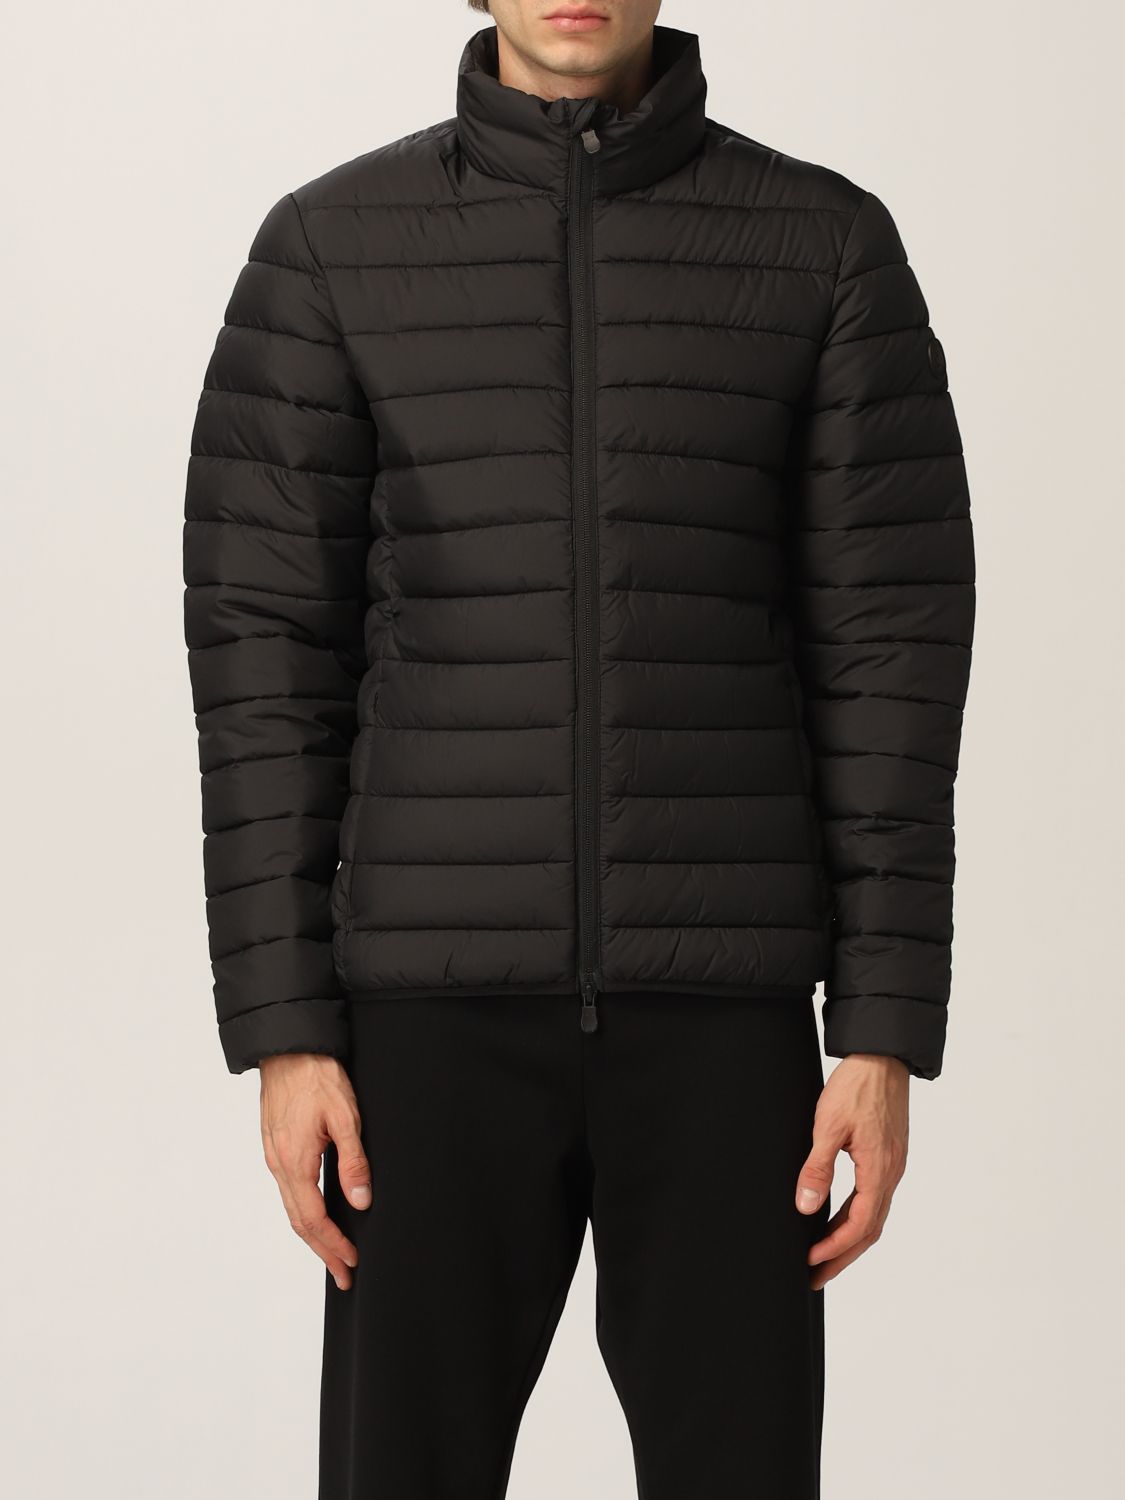 Jacket Save The Duck: Save The Duck jacket for men black 1